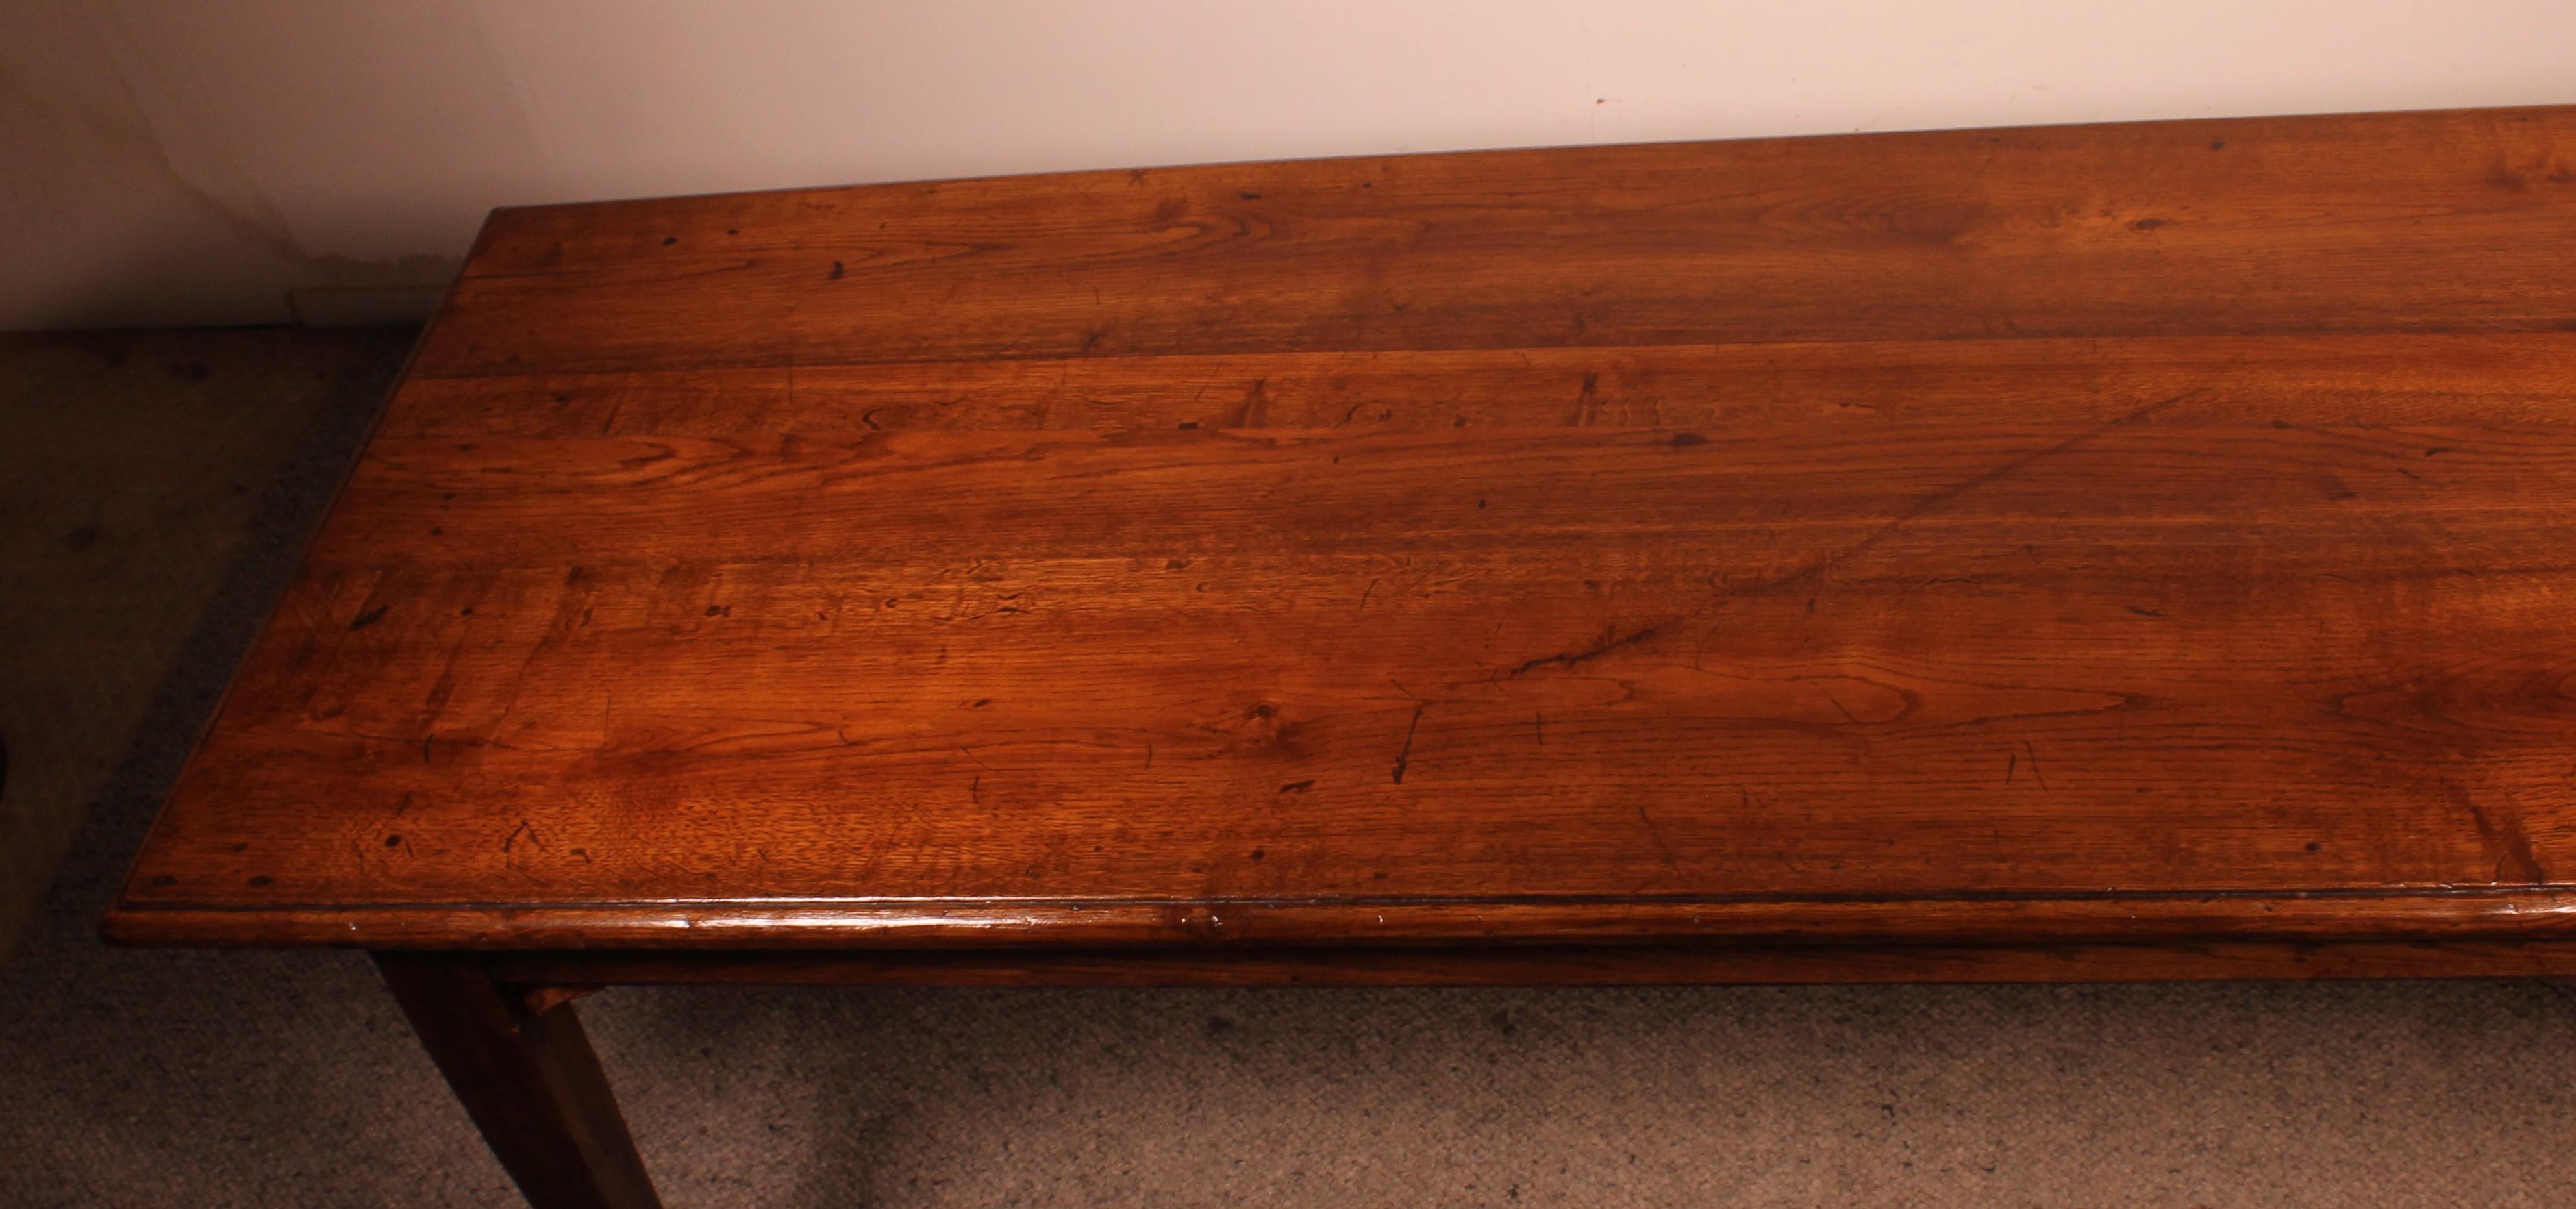 Refectory Table of Oak - 19th Century For Sale 4